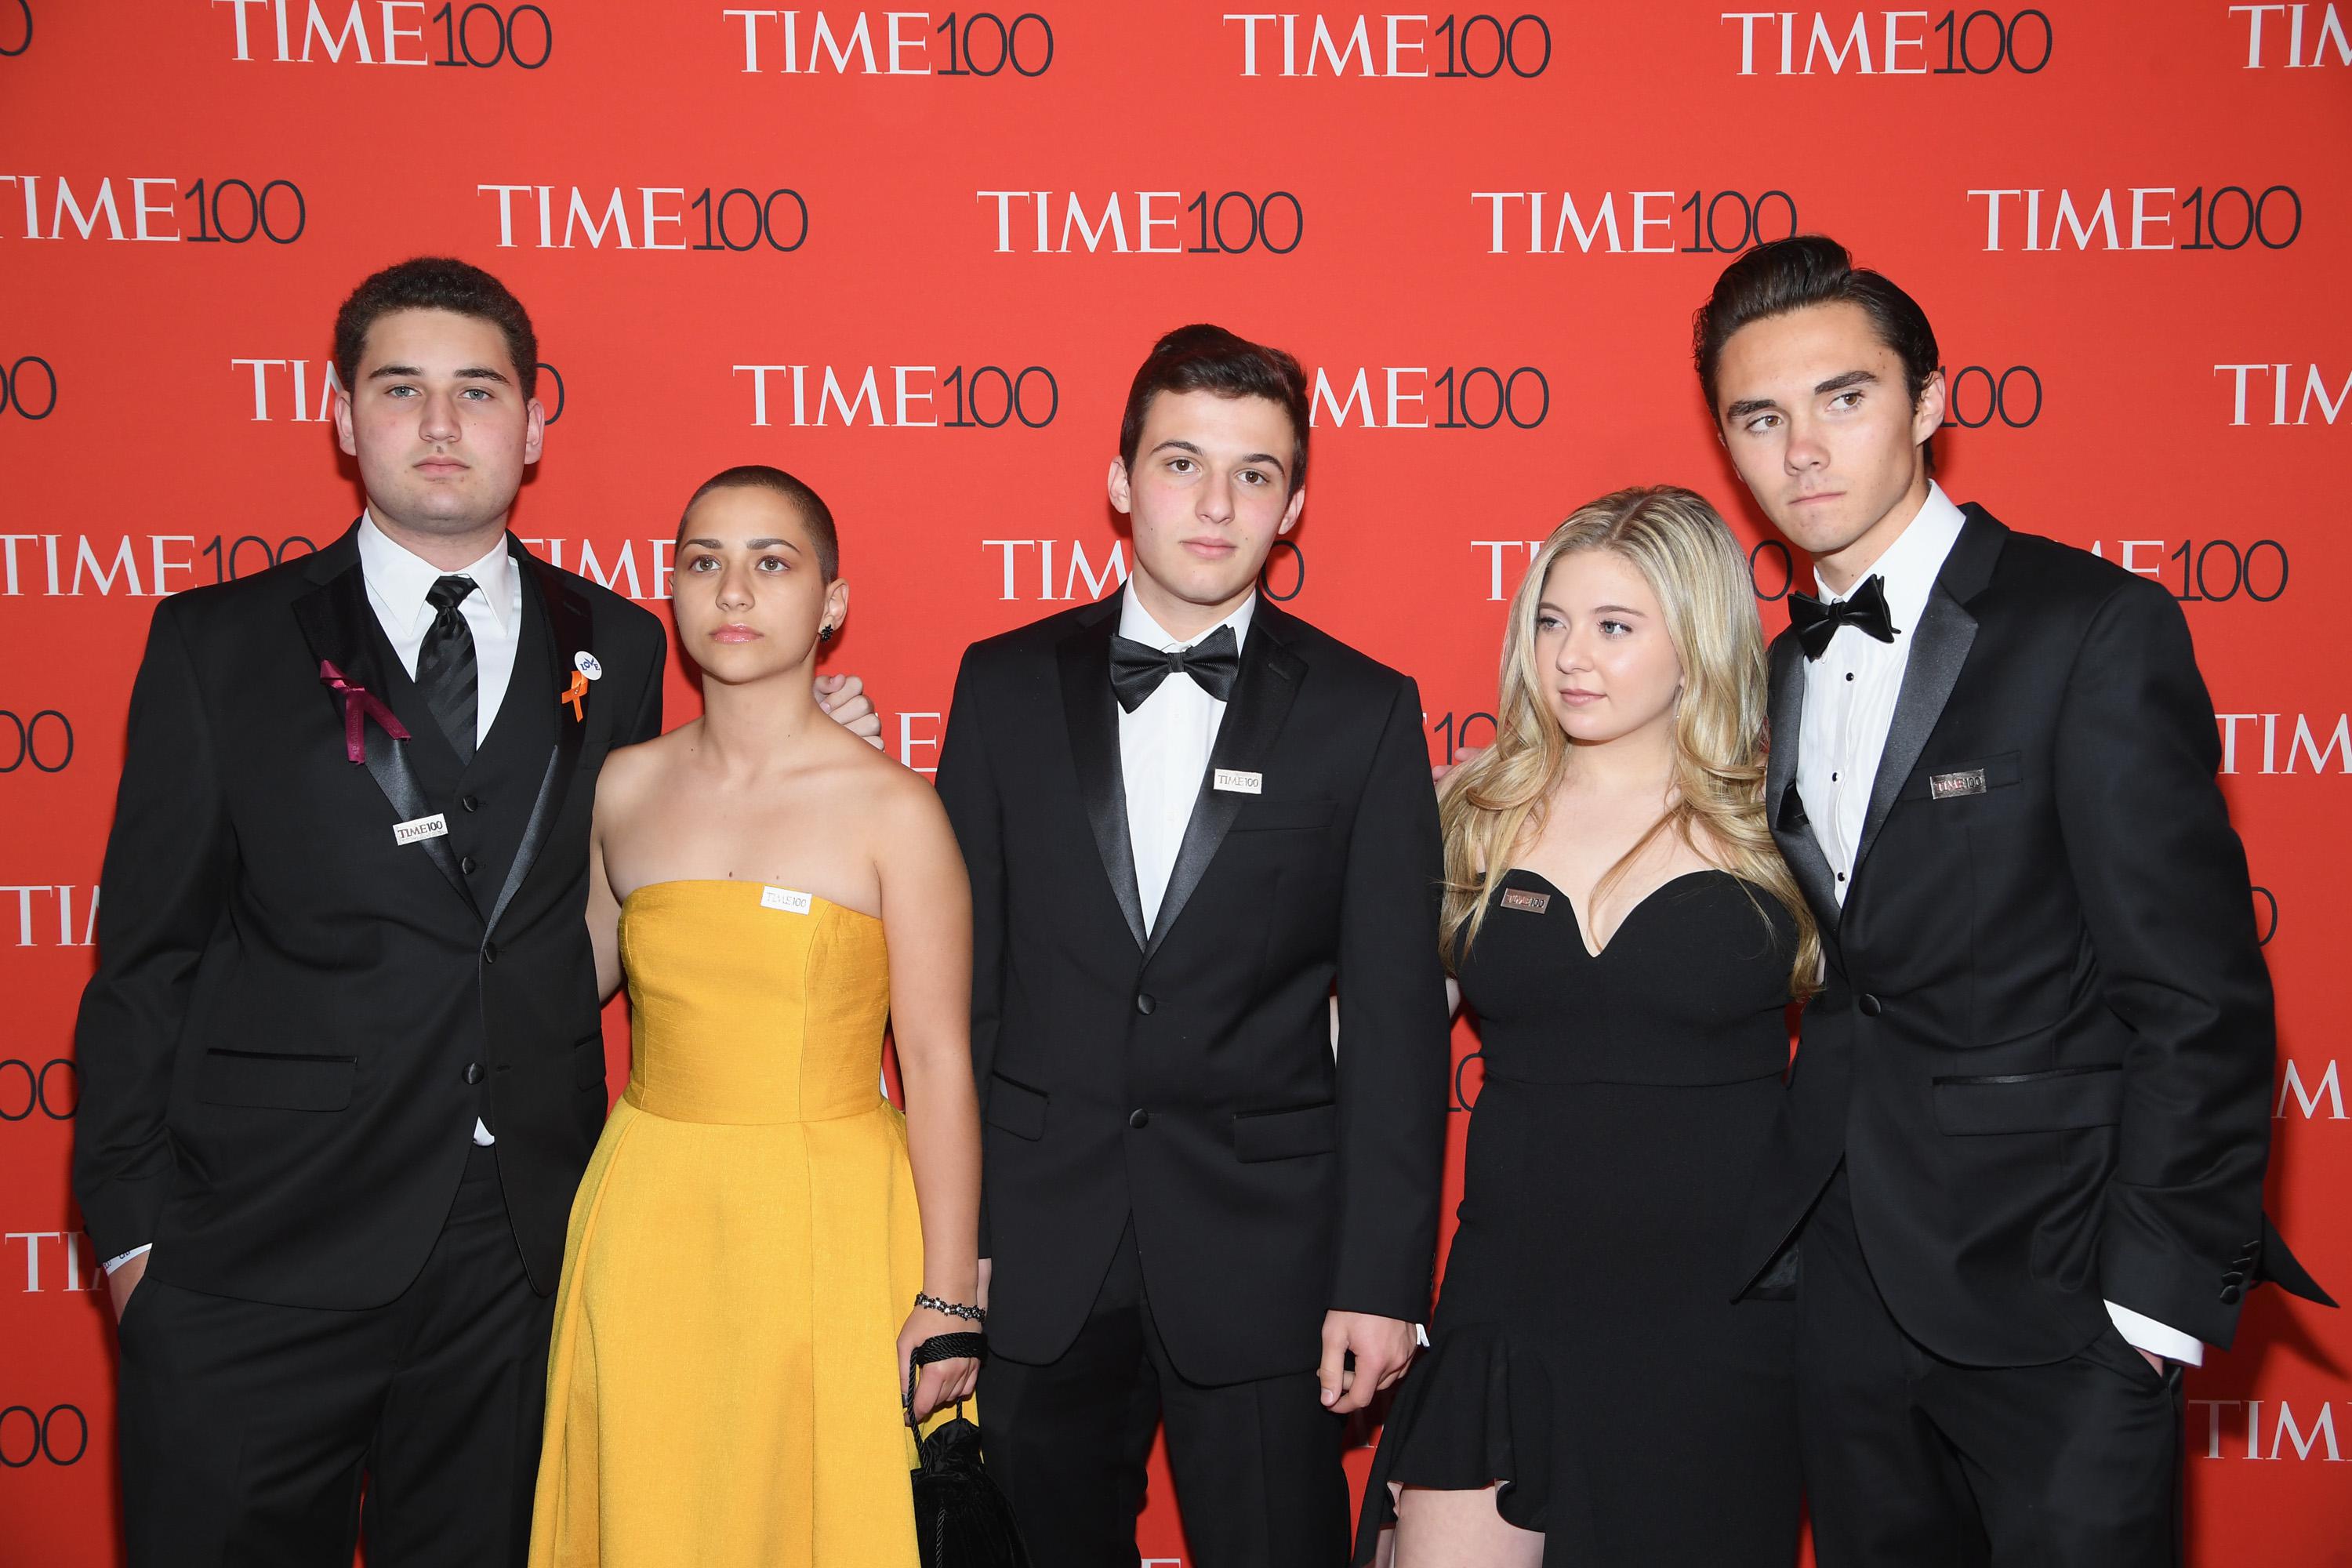 Parkland student activists at the 2018 Time 100 Gala.